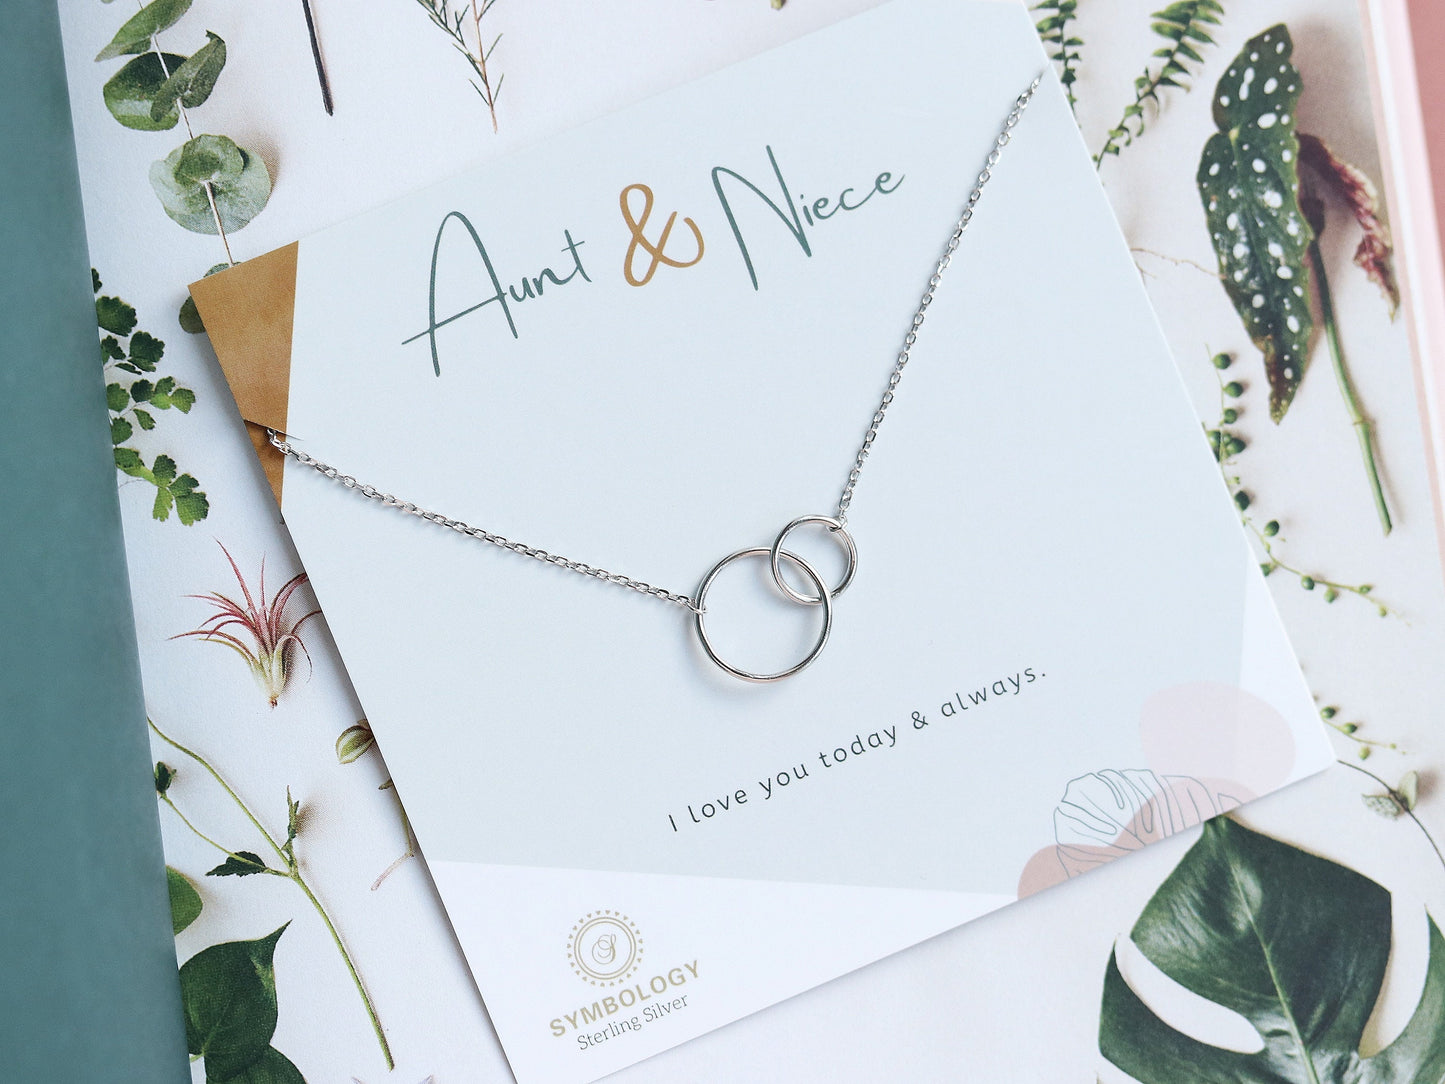 Sterling Silver Aunt & Niece Necklace, Silver Double Circle Necklace, Gold Interlinked Love Heart Necklace, Birthday Gift For Her